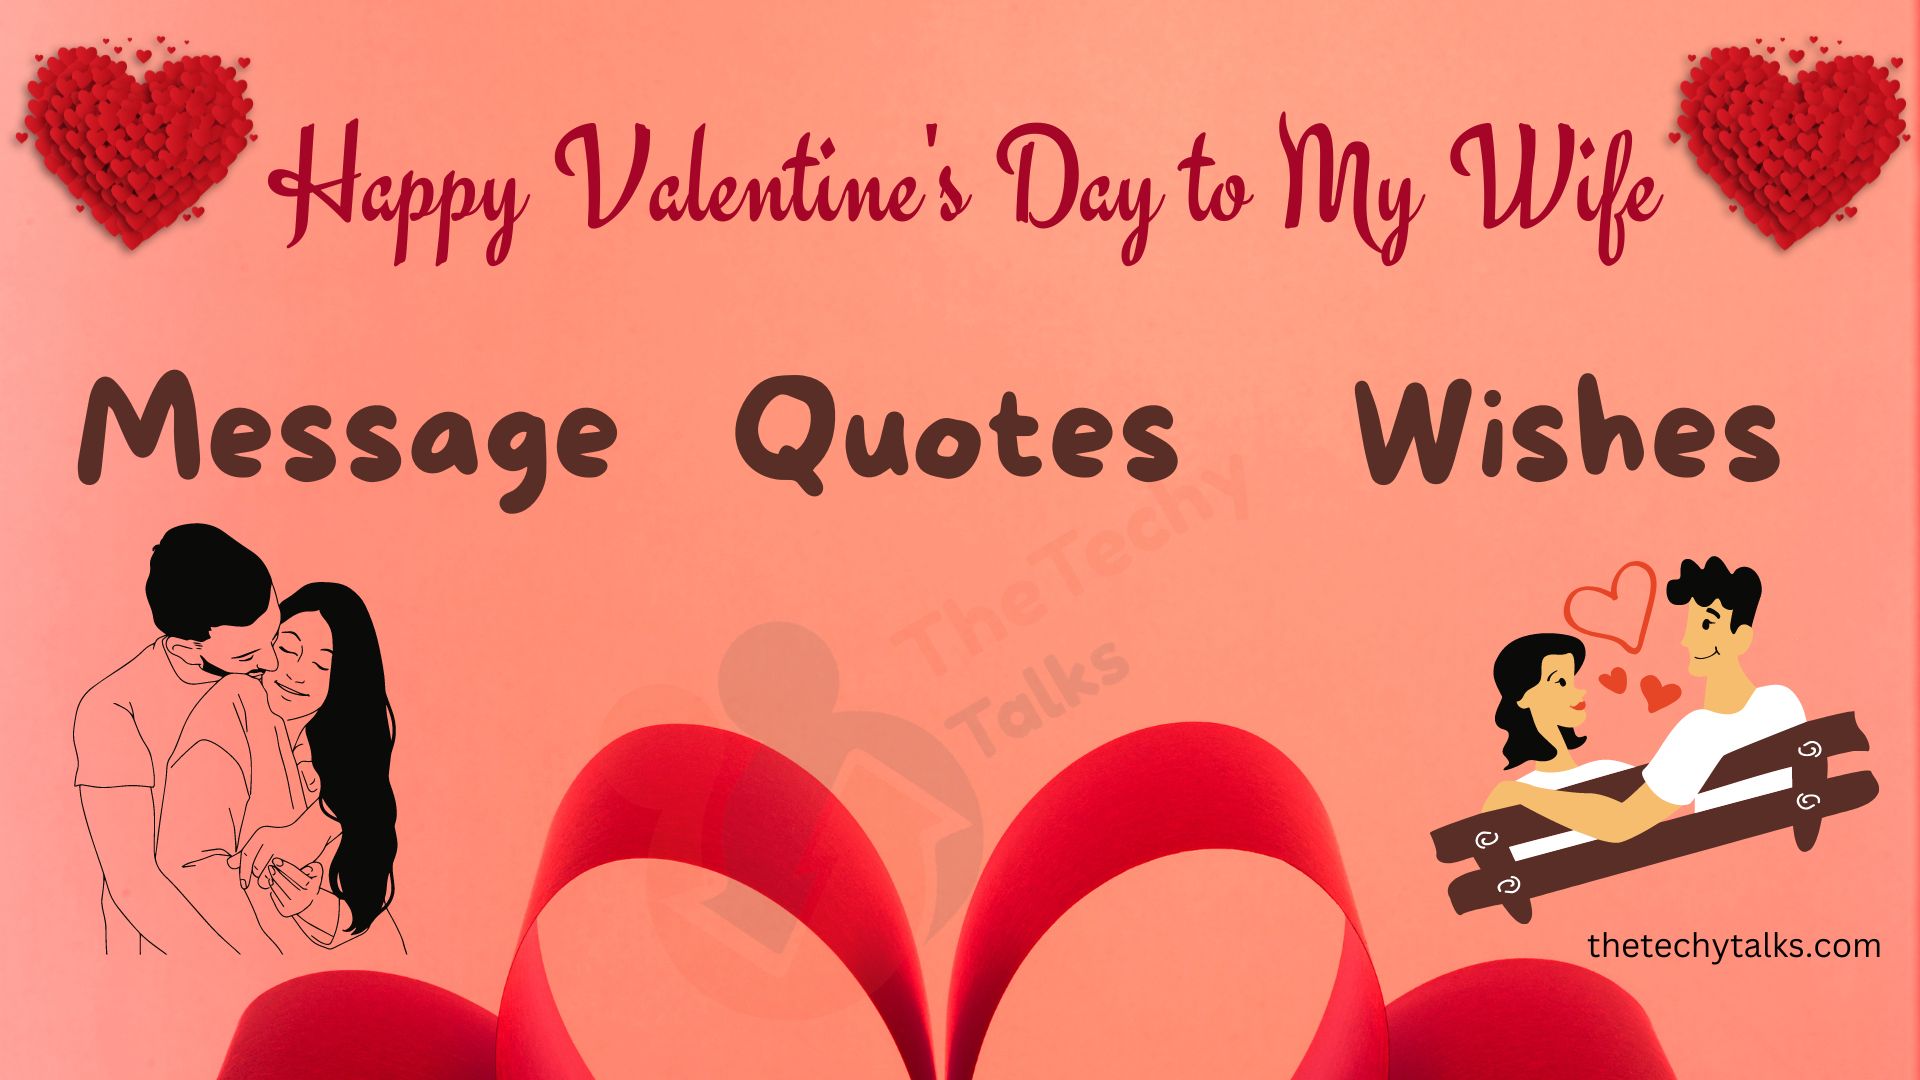 Happy Valentine's Day to My Wife | Message | Wishes | Quotes